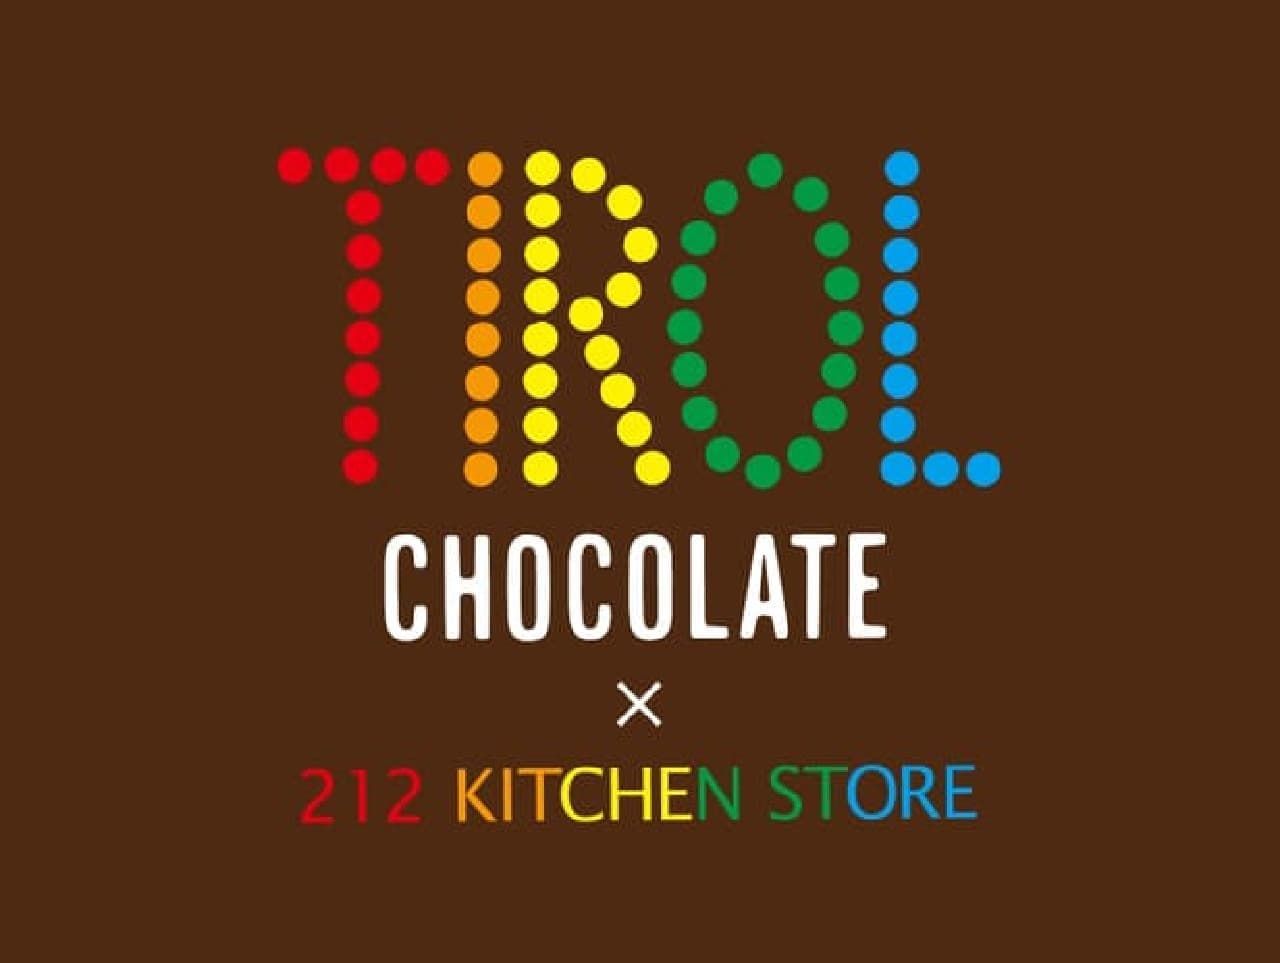 212 Kitchen store x Tyrolean chocolate collaboration --Long-selling "Coffee Nougat" in a mug